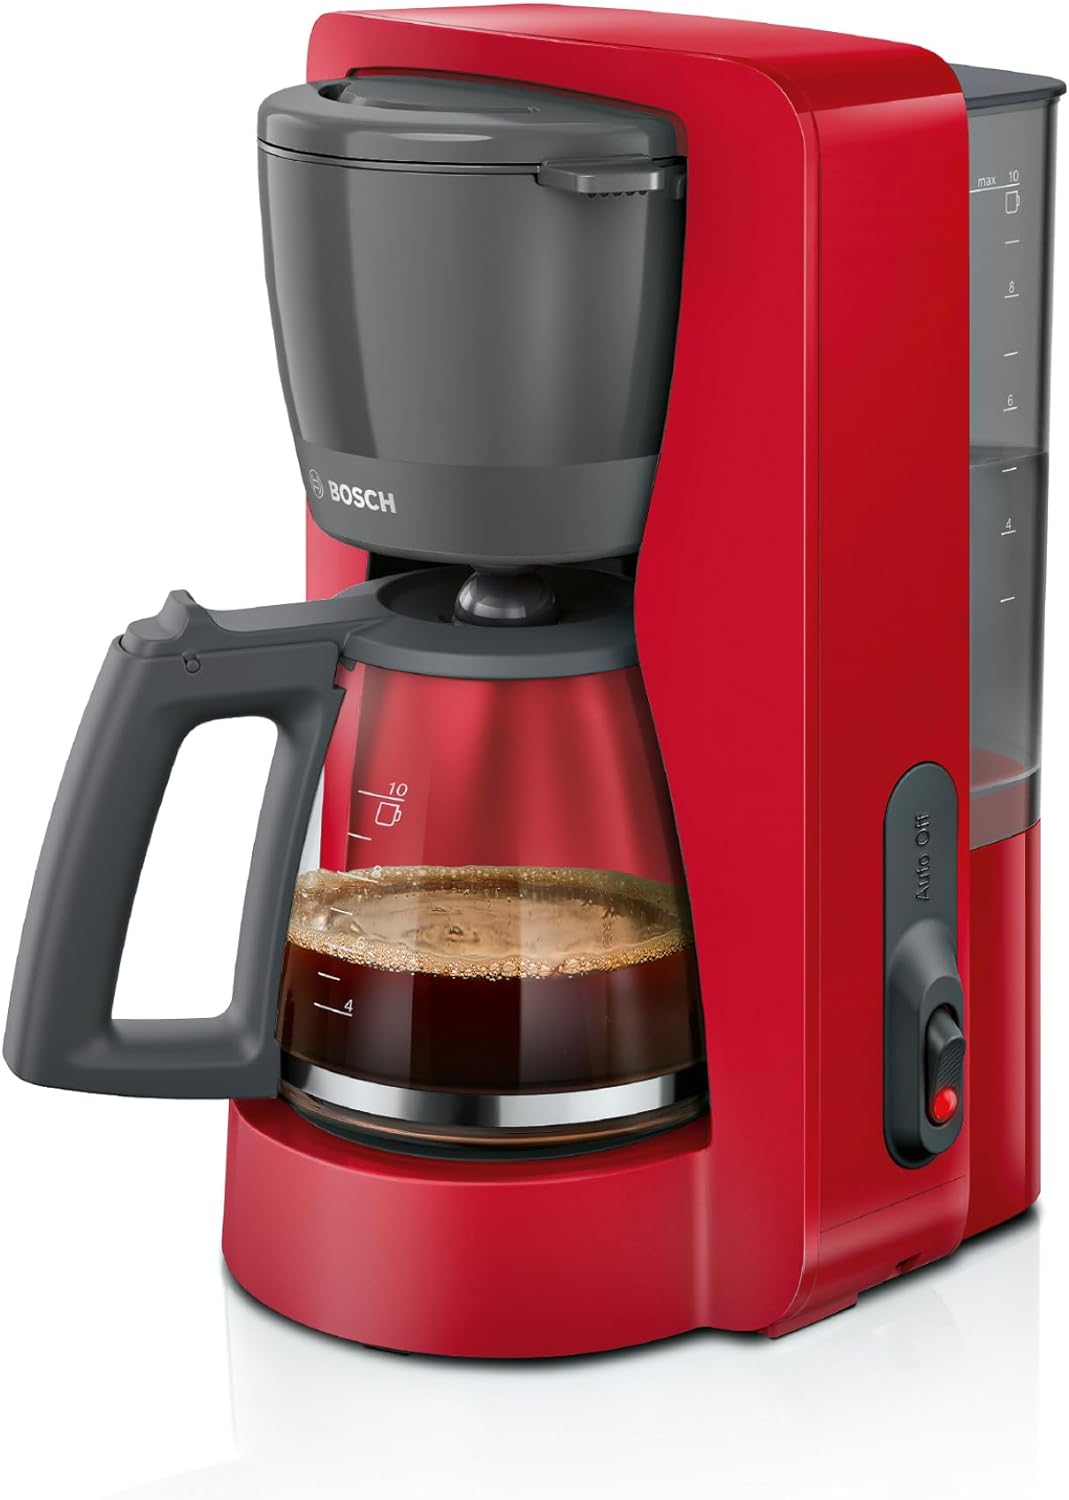 Bosch MyMoment TKA2M114 Filter Coffee Machine, 1200 W, Glass Jug 1.25 L, for 10-15 Cups, 40 min Keep Warm Function, Matte Red